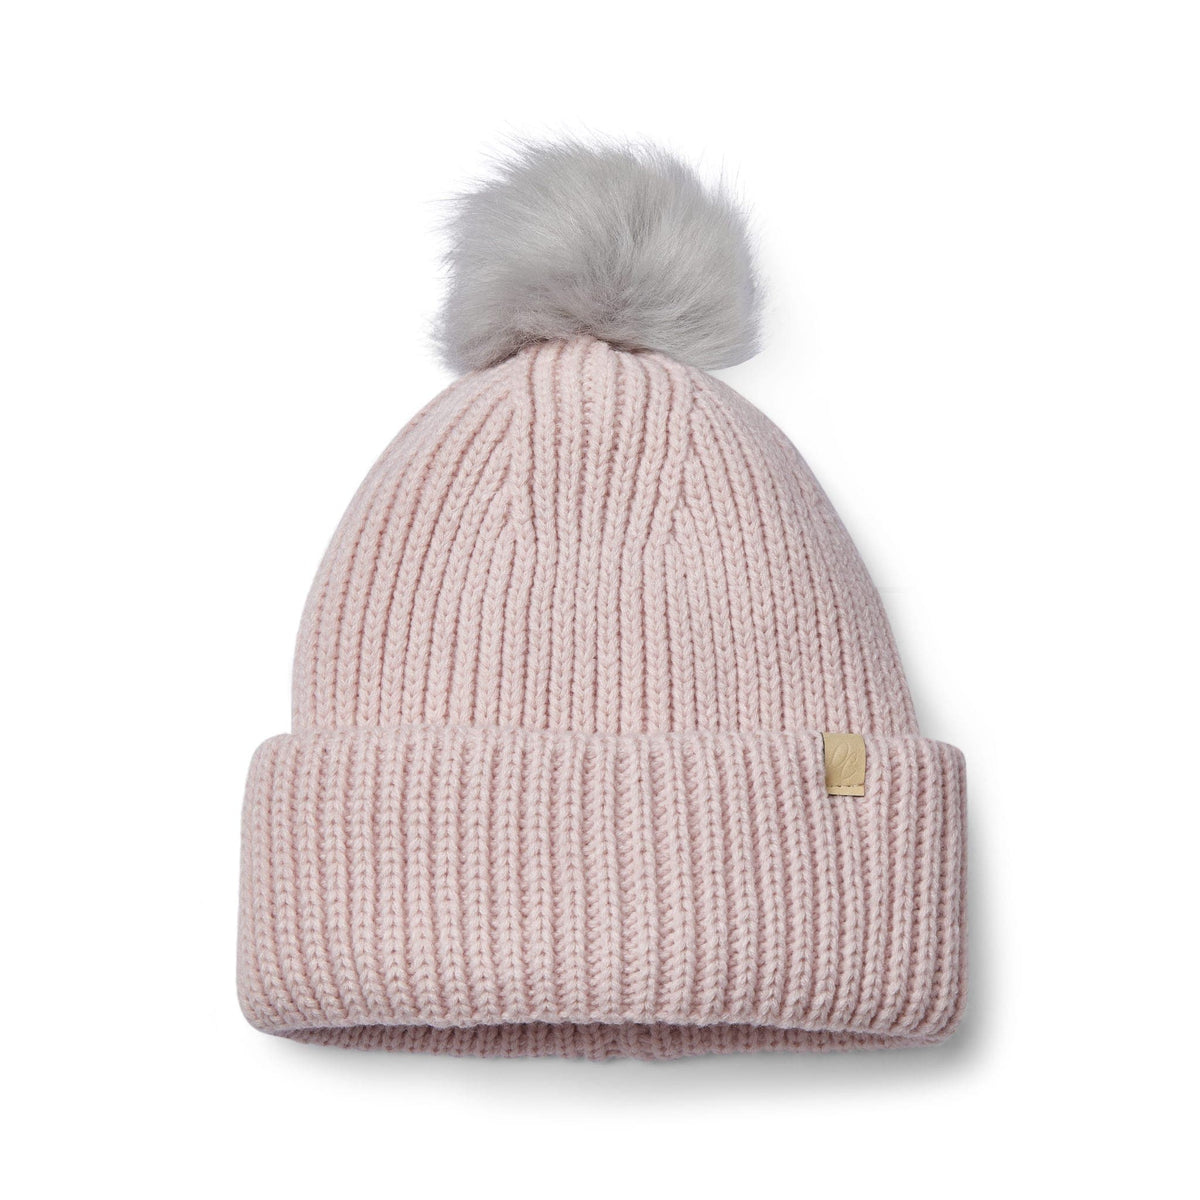 Only Curls Chunky Satin Lined Beanie - Dusty Pink with Pom Pom - Only Curls